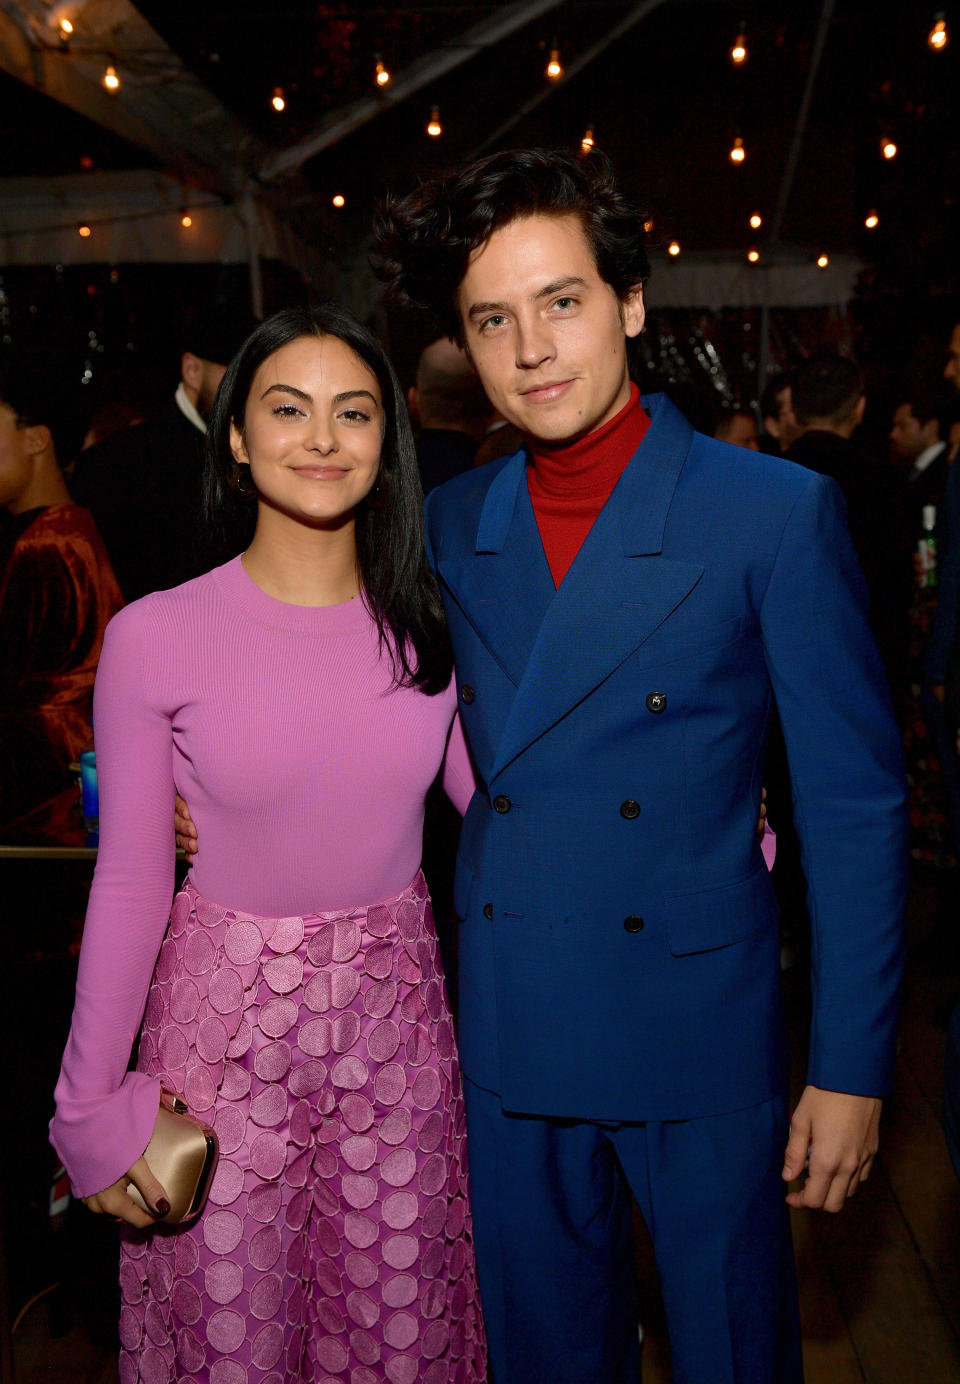 Camila Mendes and Cole Sprouse arrive at the GQ Men of the Year Party on December 6, 2018